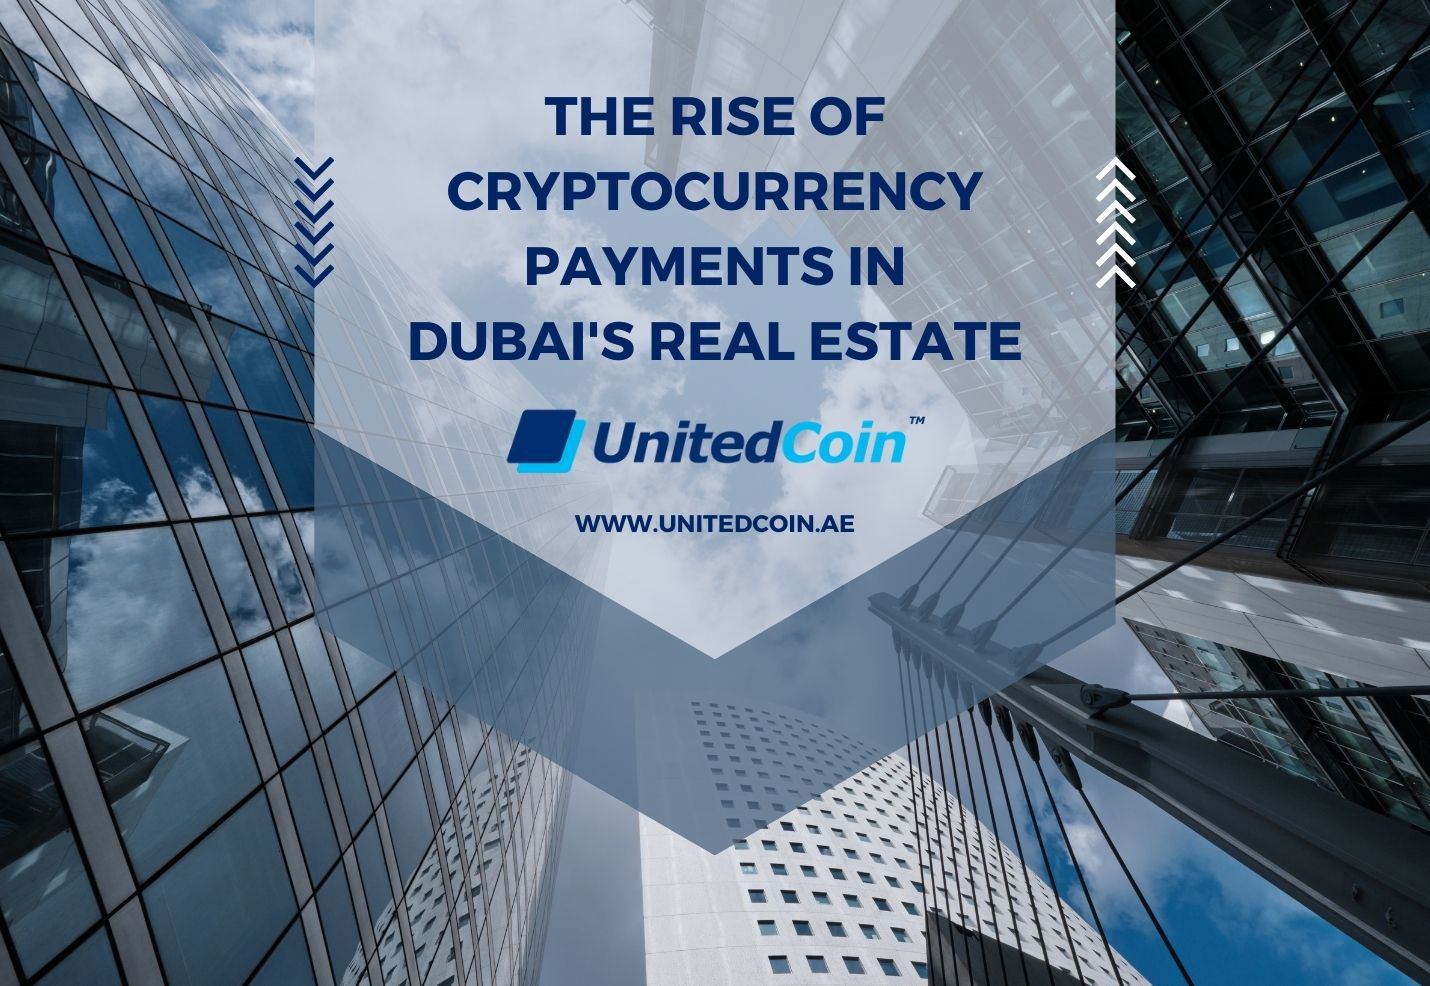 United Coin: The Rise of Cryptocurrency Payments in Dubai's Real Estate